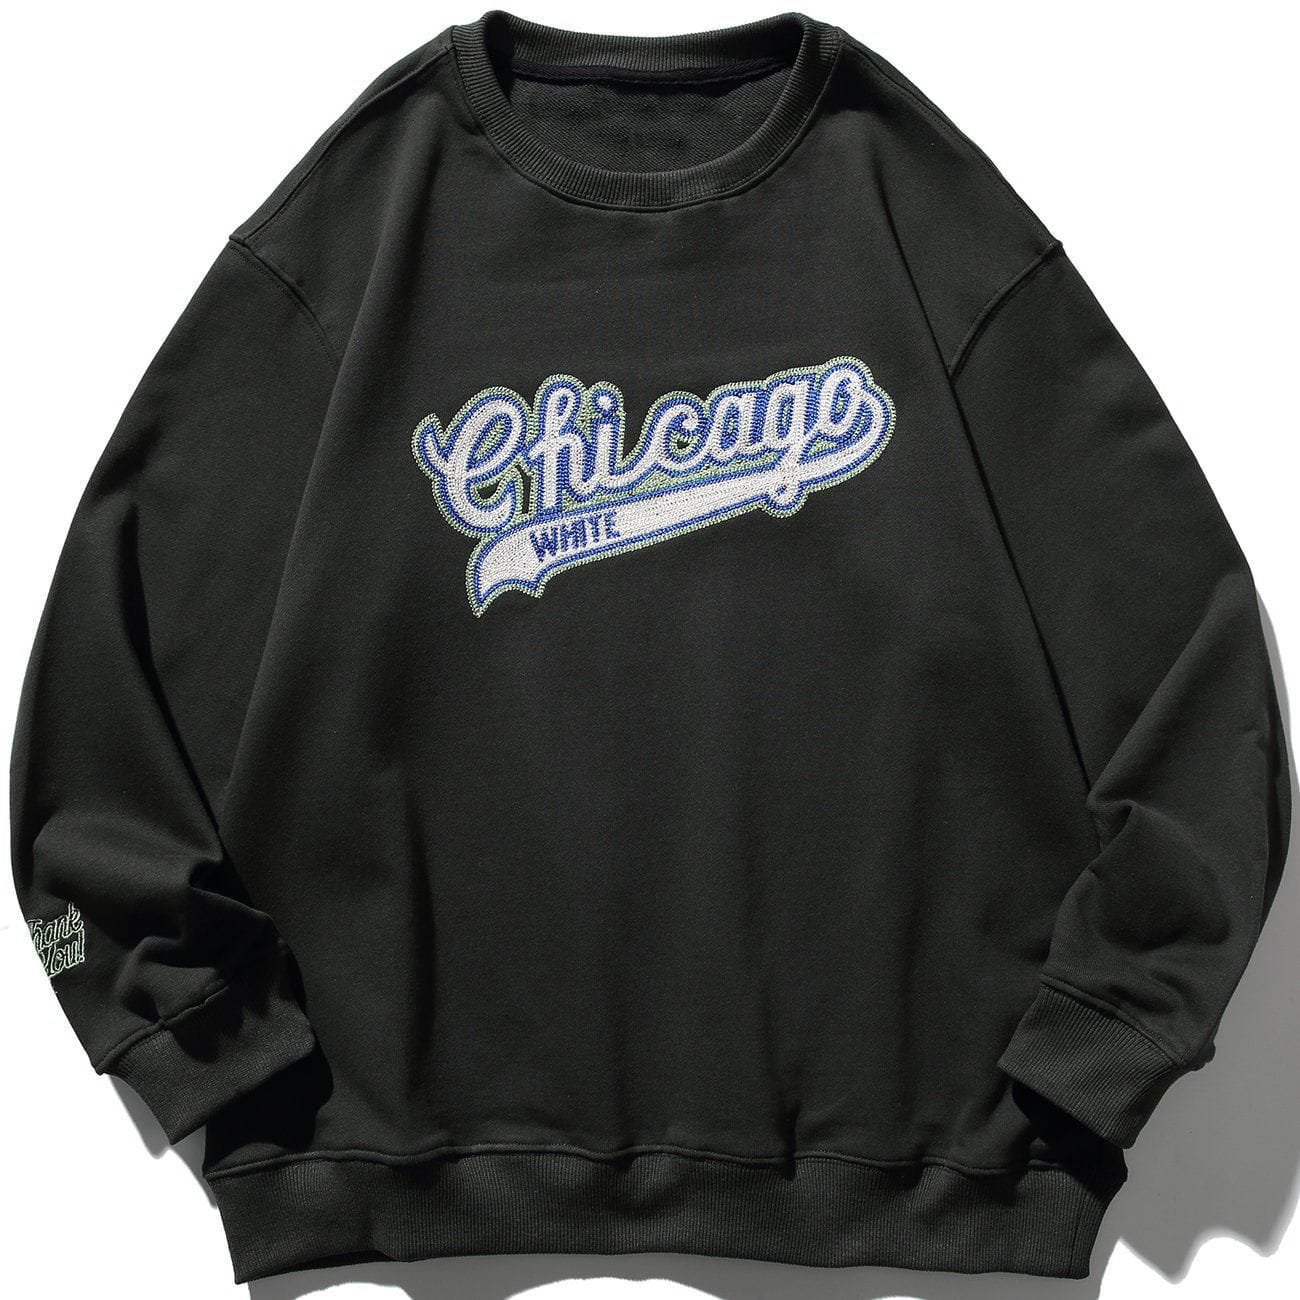 LUXENFY™ - Chest Letter Embroidery Sweatshirt luxenfy.com